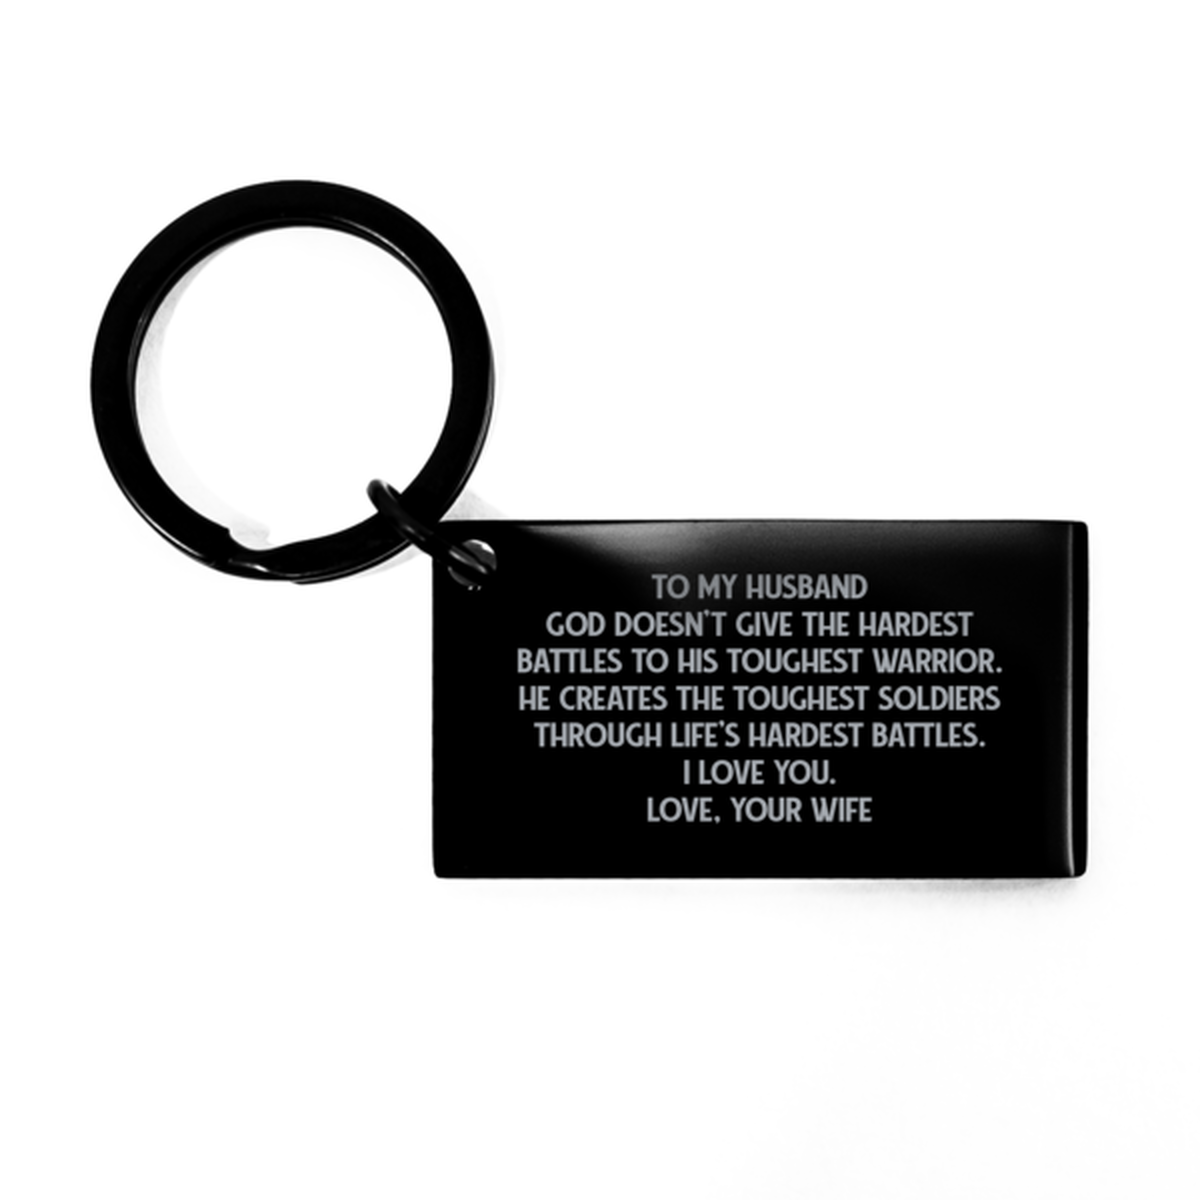 To My Husband Black Keychain, God Creates The Toughest Soldiers, Anniversary Gifts For Husband From Wife, Birthday Gifts For Men